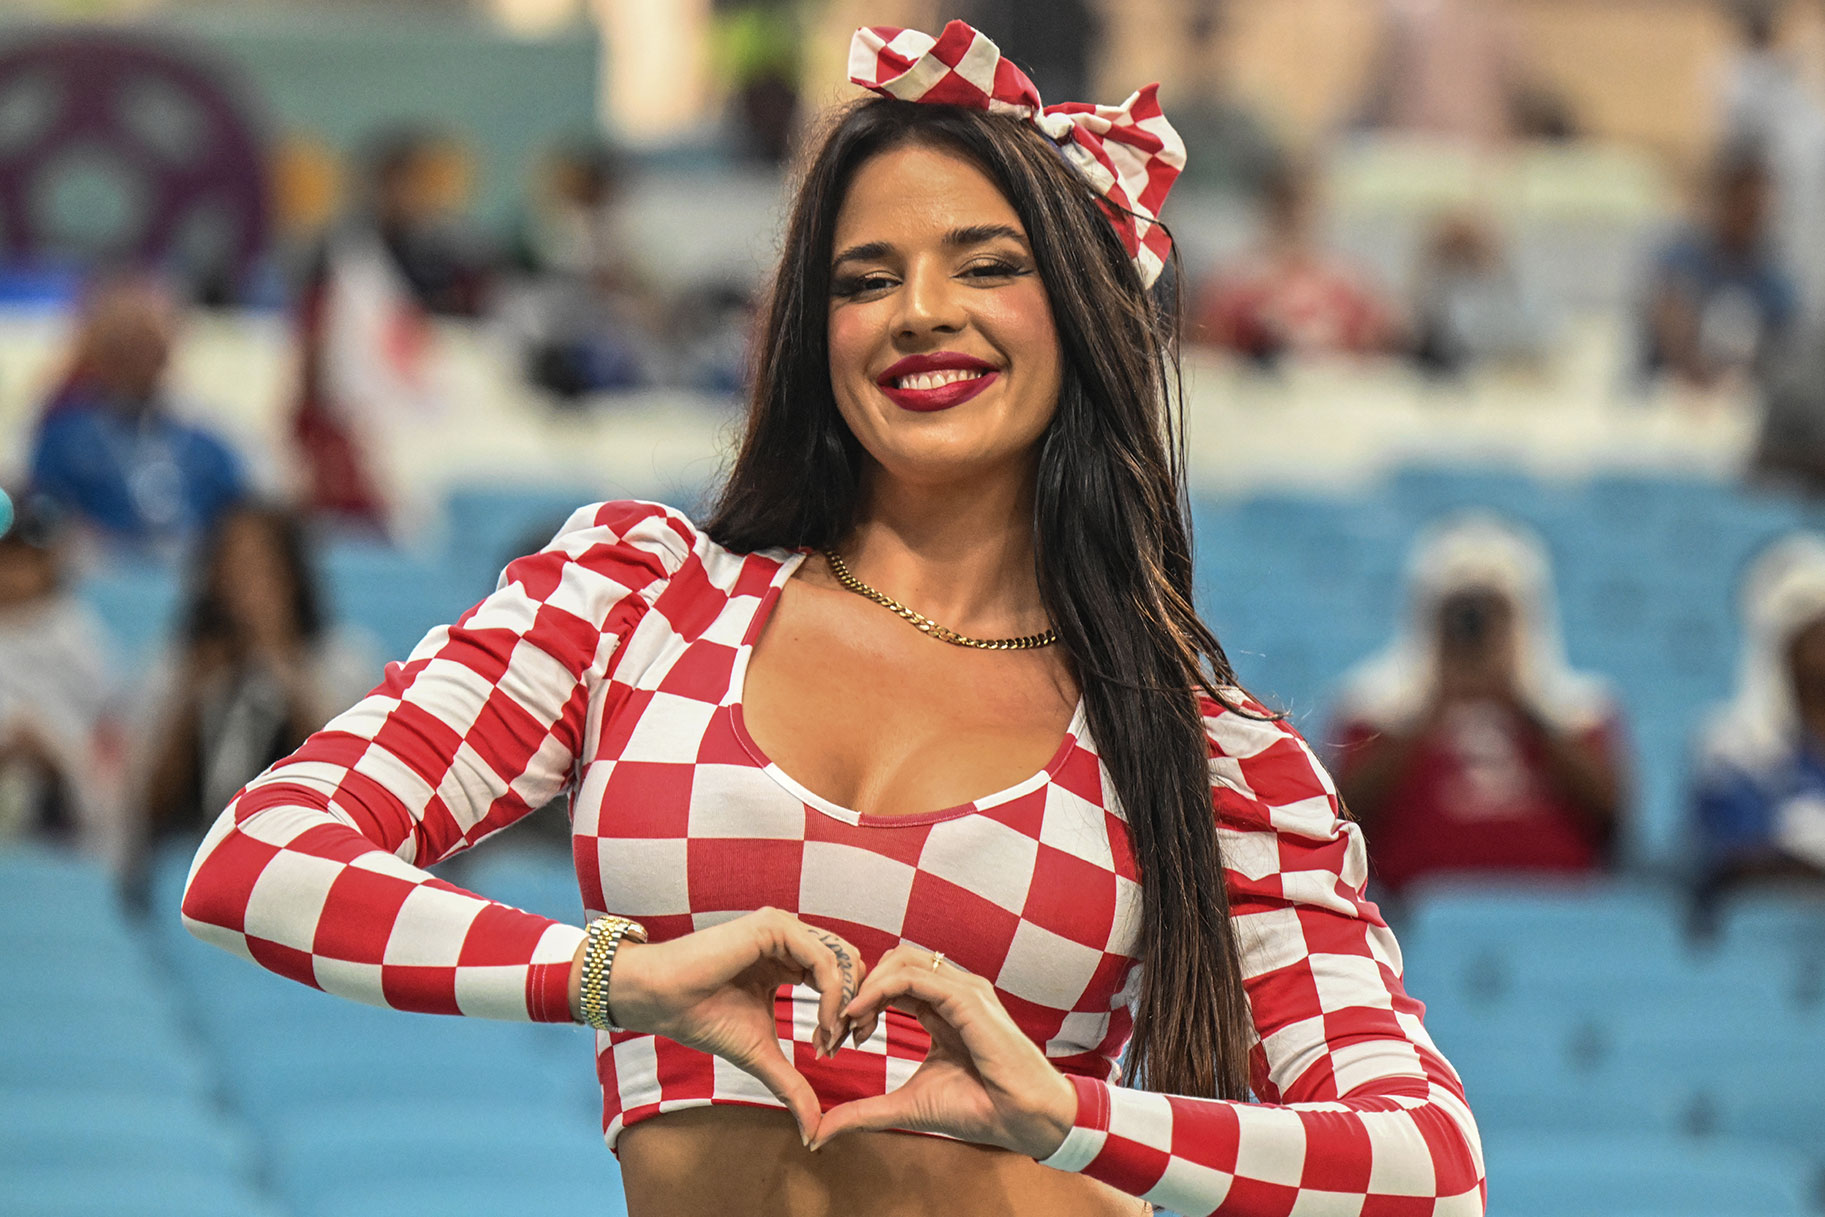 vana Knöll, a model from Croatia, poses in the stands before the match